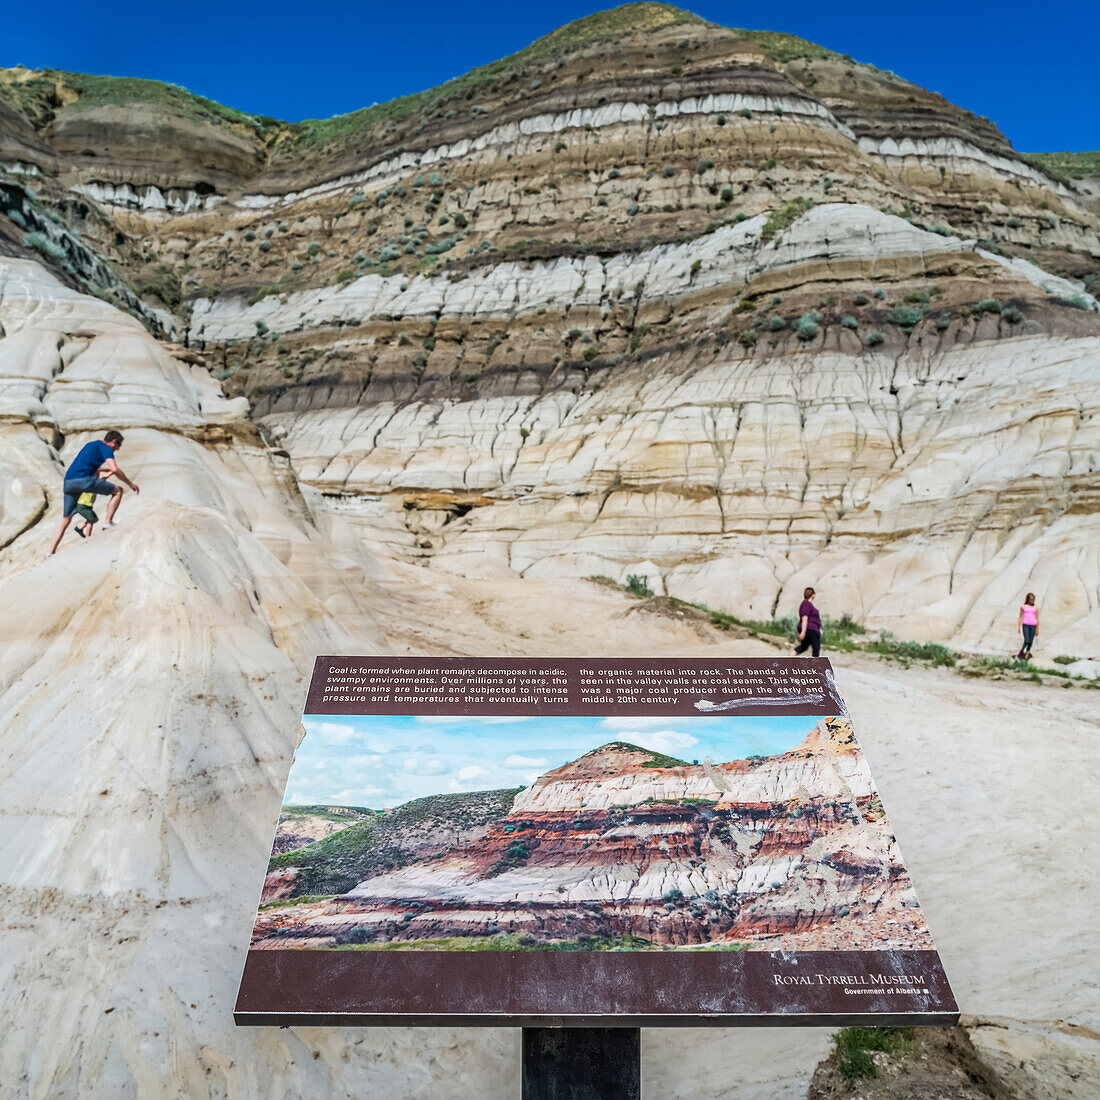 Tourists on Hoodoos Trail in the Canadian Badlands. Each hoodoo is a sandstone pillar resting on a thick base of shale that is capped by a large stone; Drumheller, Alberta, Canada